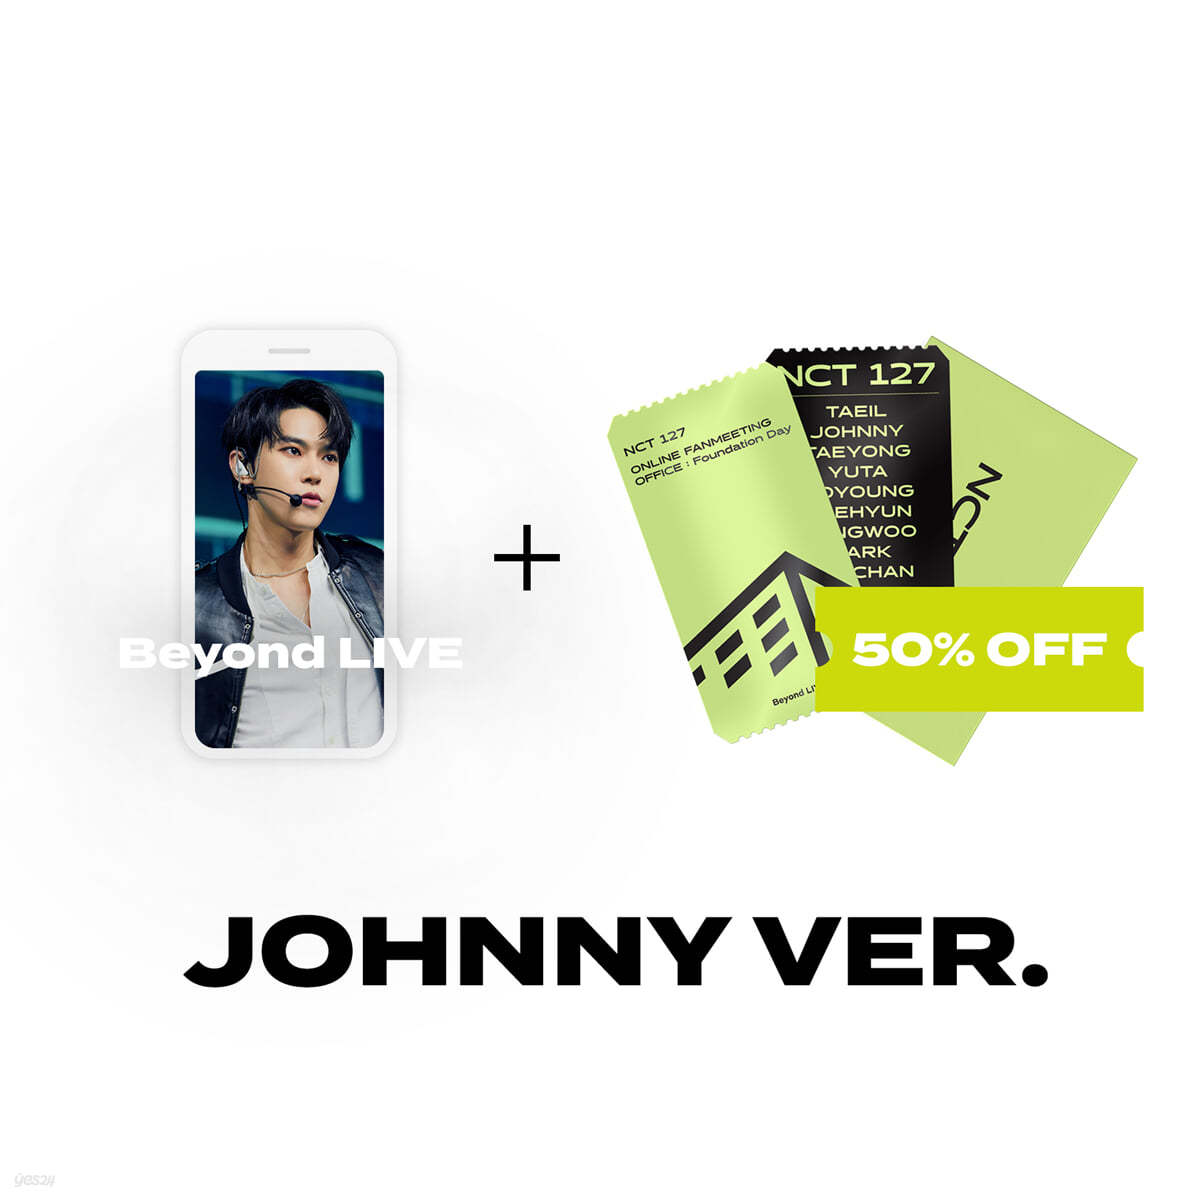 [JOHNNY] Beyond LIVE 관람권 + SPECIAL AR TICKET SET Beyond LIVE - NCT 127 ONLINE FANMEETING 'OFFICE : Foundation Day'